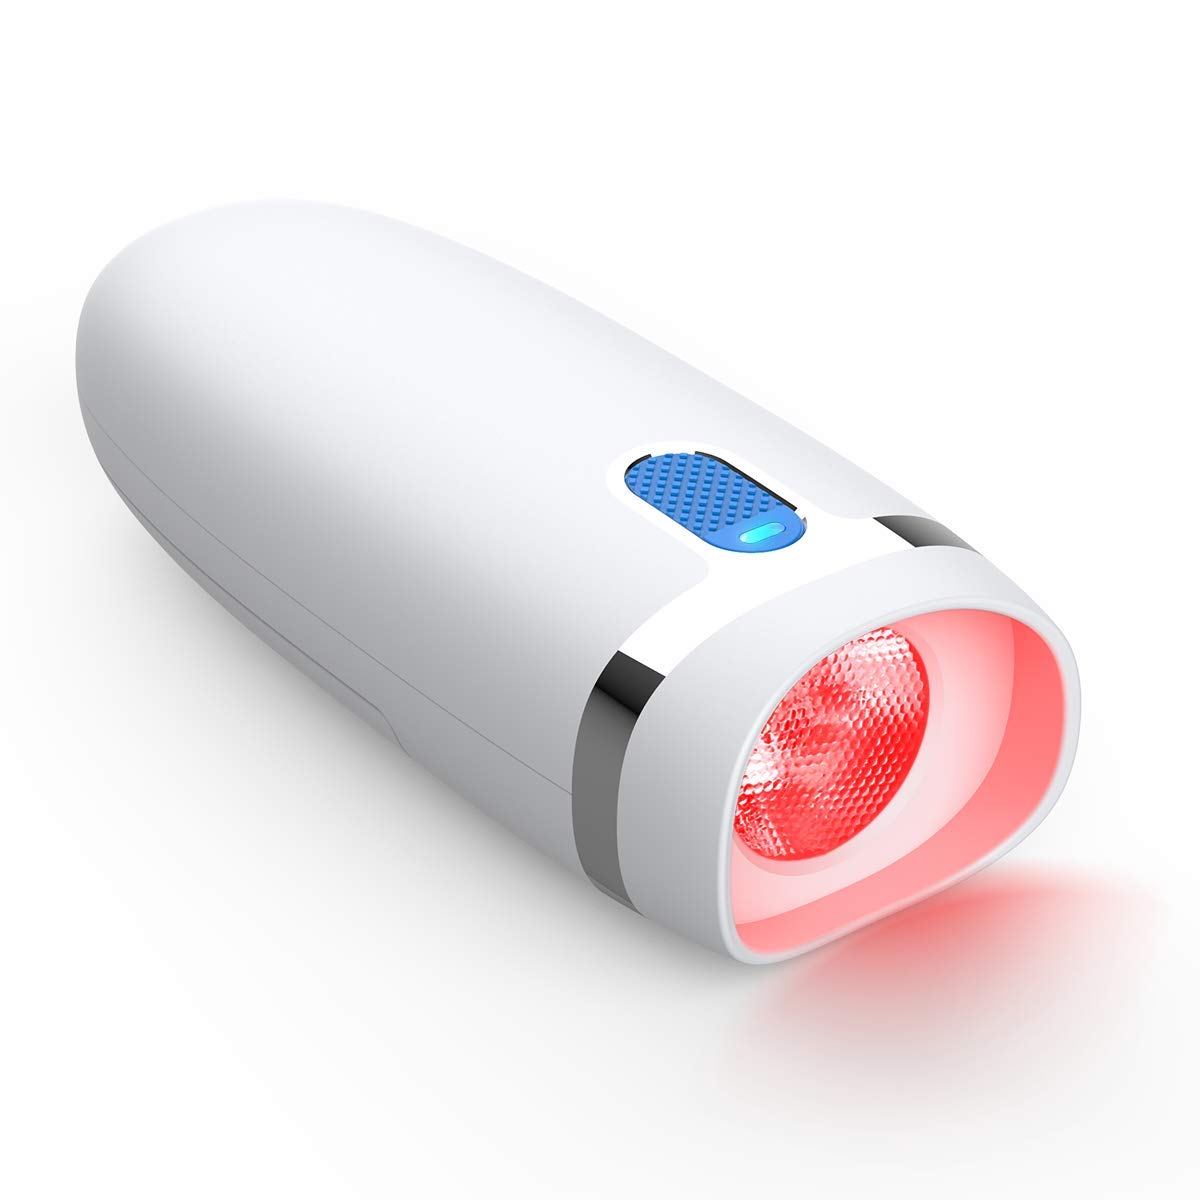 Red Light Therapy Device with Powerful 3 Watt LED - 1500 MW Output for Muscle, Joint, Neck, Handhold, 2 MINs Auto Off